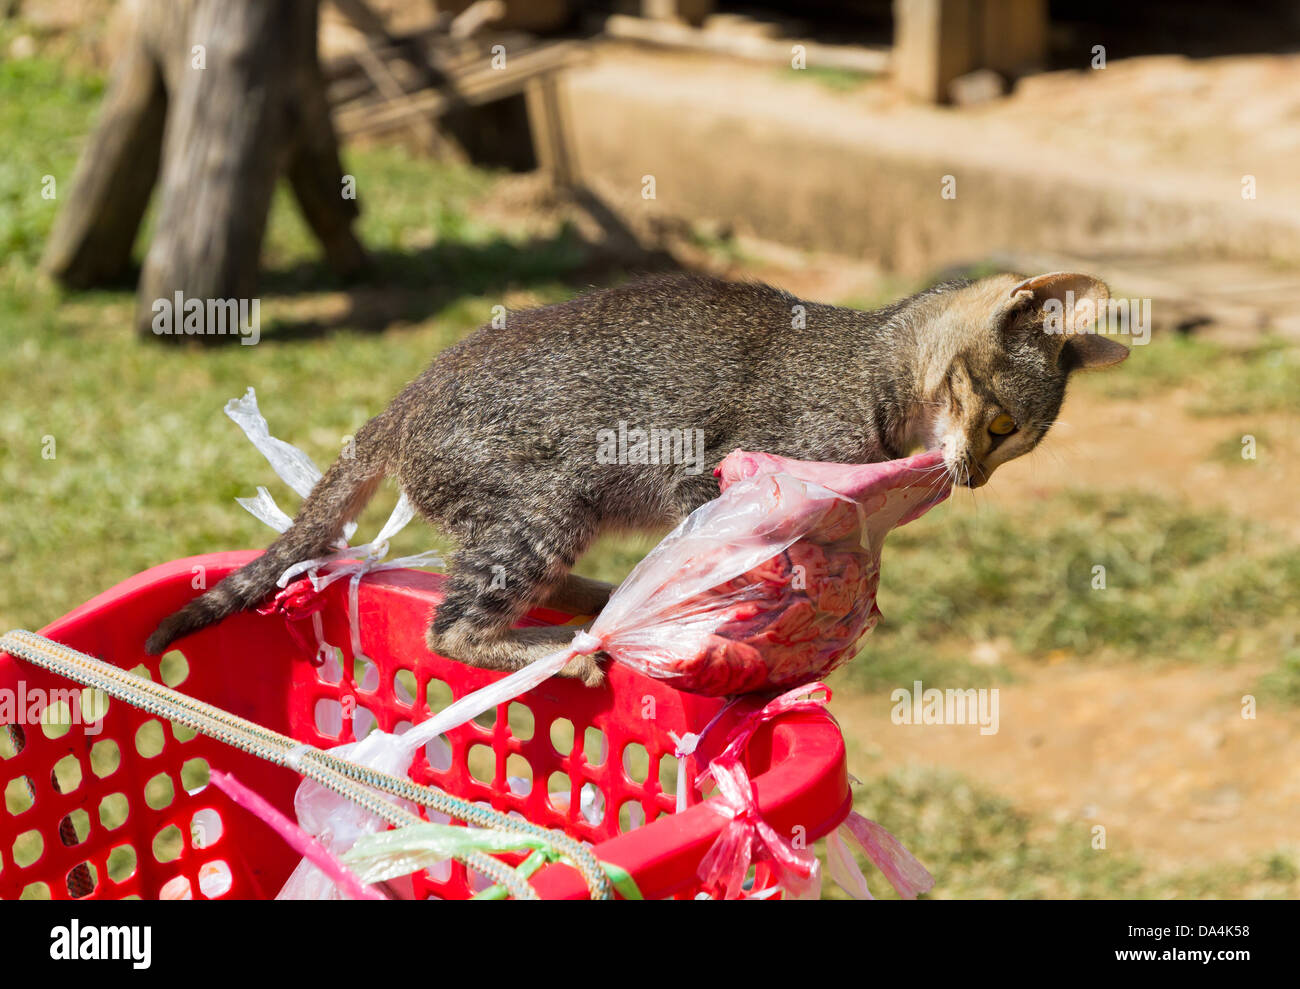 small kitten tries to steal meat wrapped in a plastic bag in a basket Stock Photo